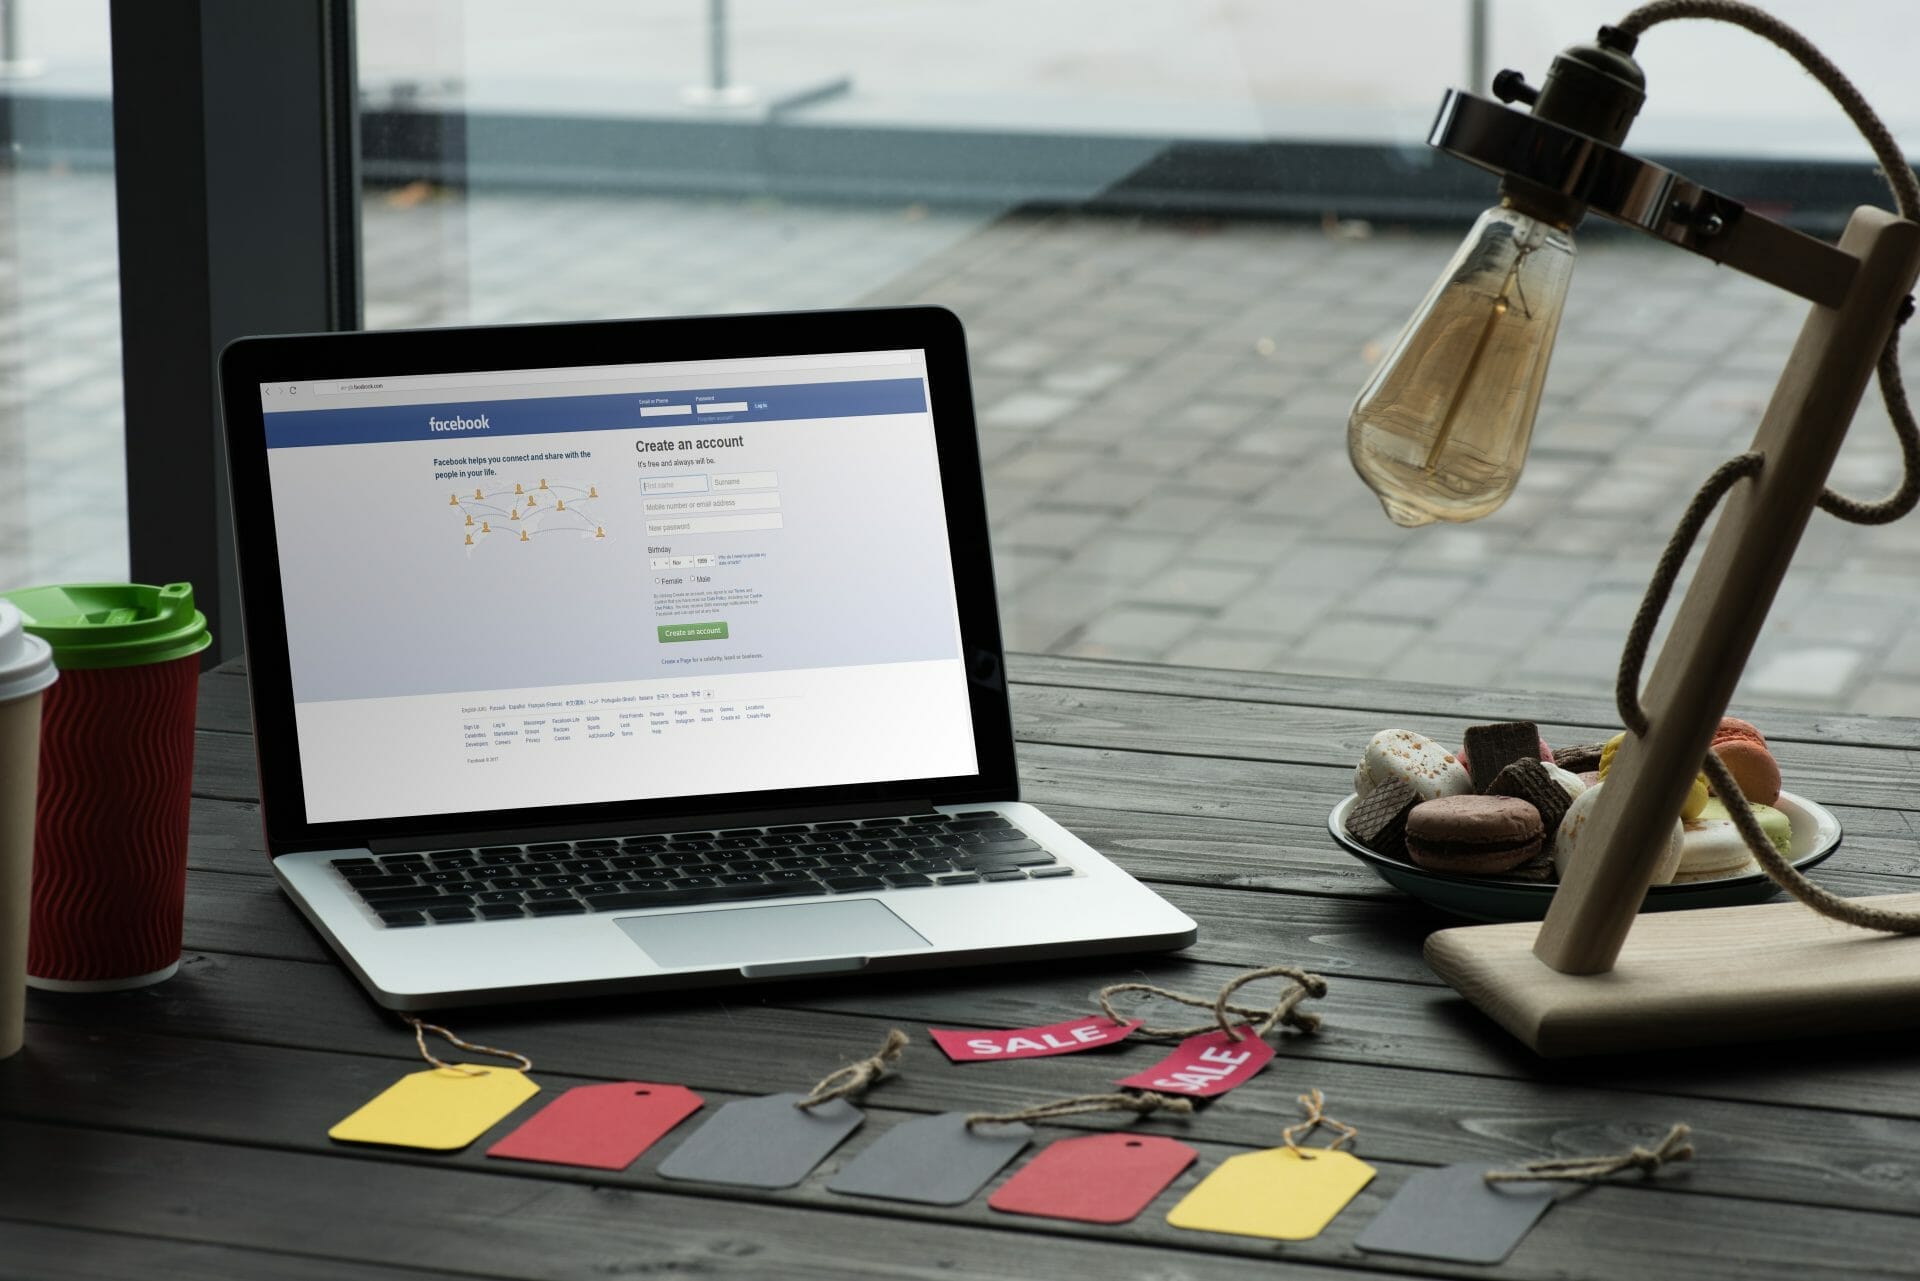 How to promote your business with Facebook groups